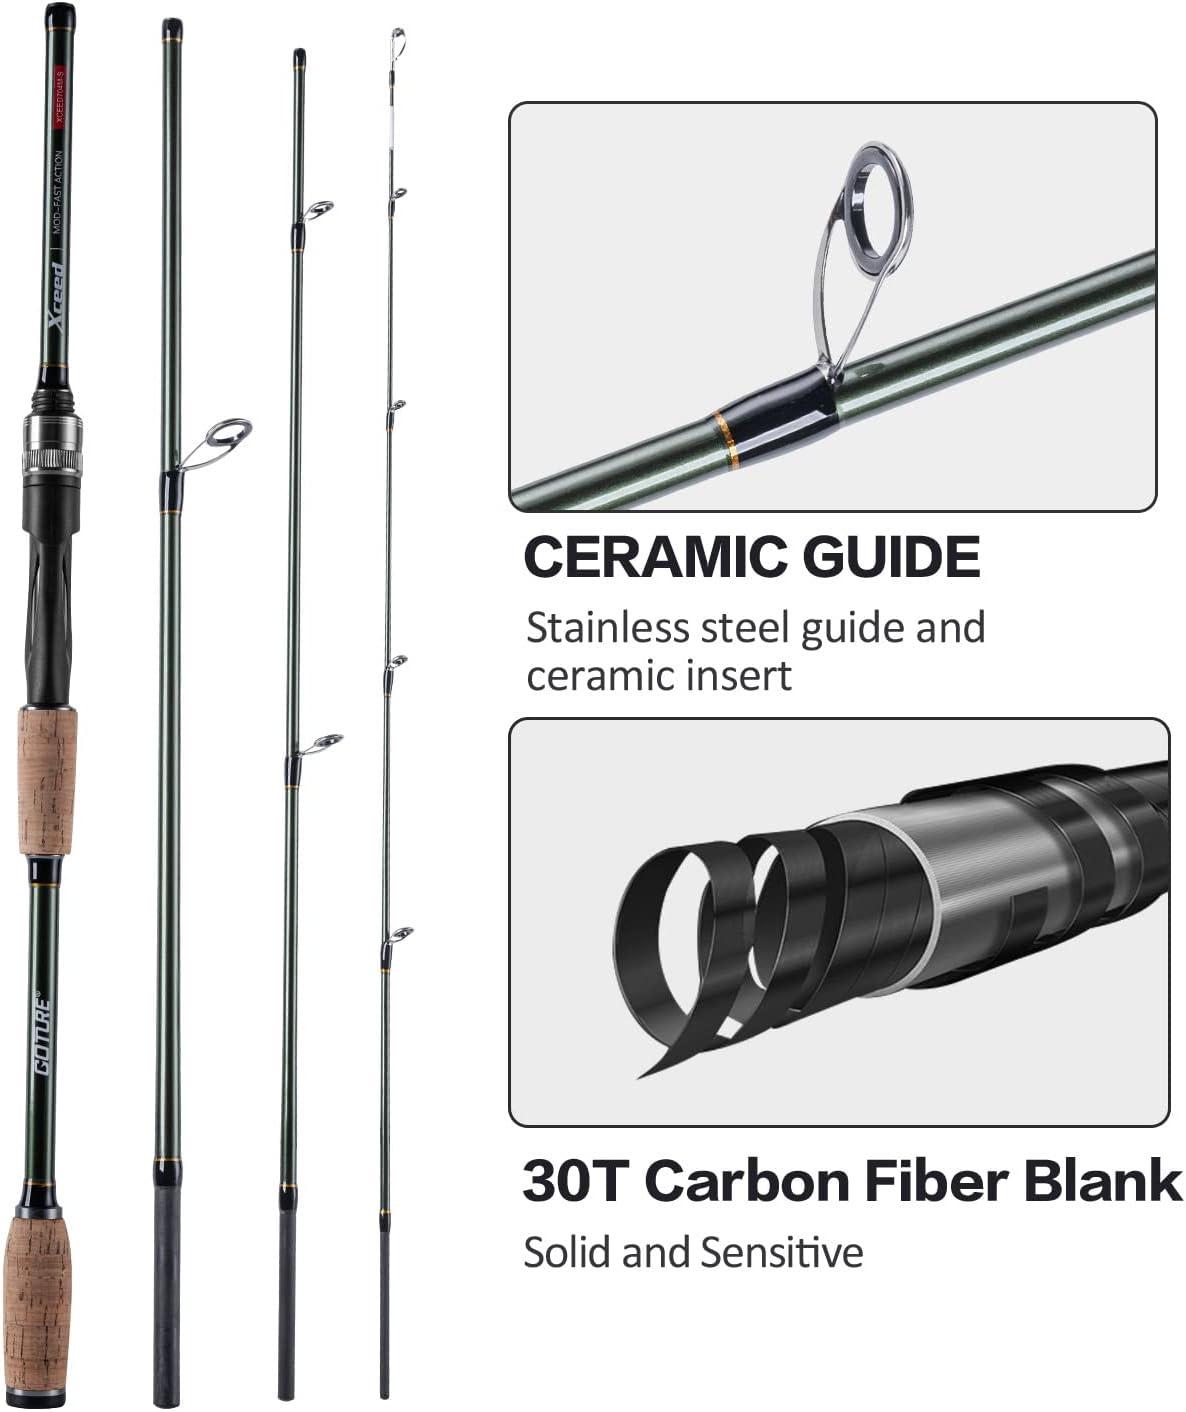 Goture Travel Fishing Rods 2 Piece/4 Piece Fishing Pole with Case/Bag Fly  Fishing Kit/Surf Casting/Spinning Rod Ultralight Fishing Baitcast Rod  6ft-12ft for Saltwater Trout Bass Walleye Pike 4 Piece Fishing Rod Dark